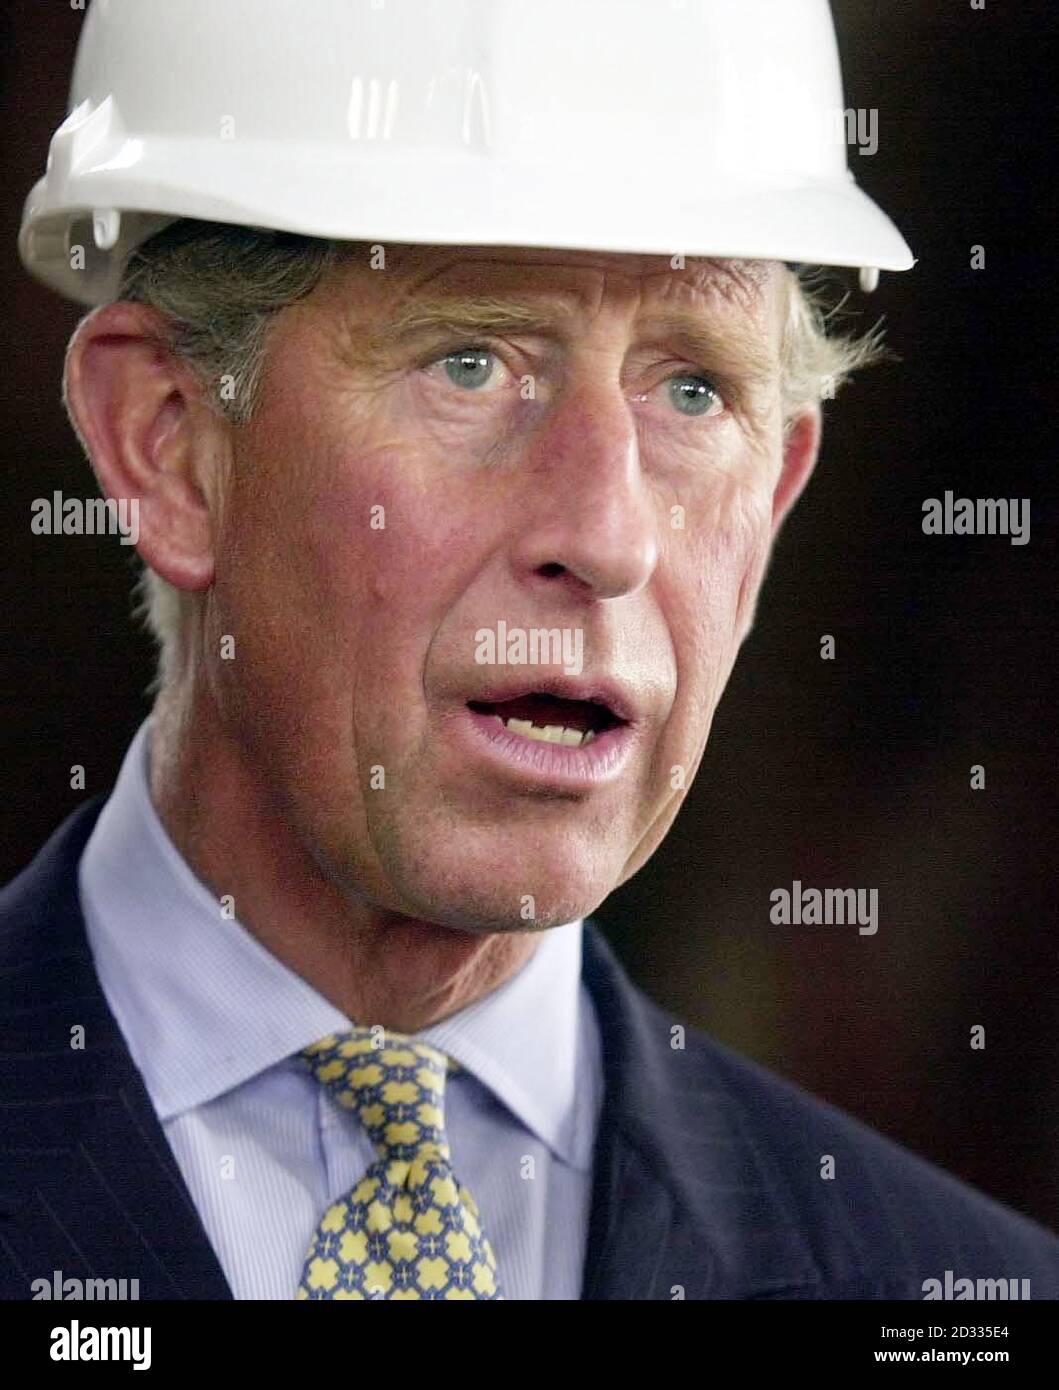 The Prince of Wales during his visit to Crossness Pumping Station in Thamesmead, London, where he was switching on the newly restored 'Prince Consort' Beam Engine. Stock Photo